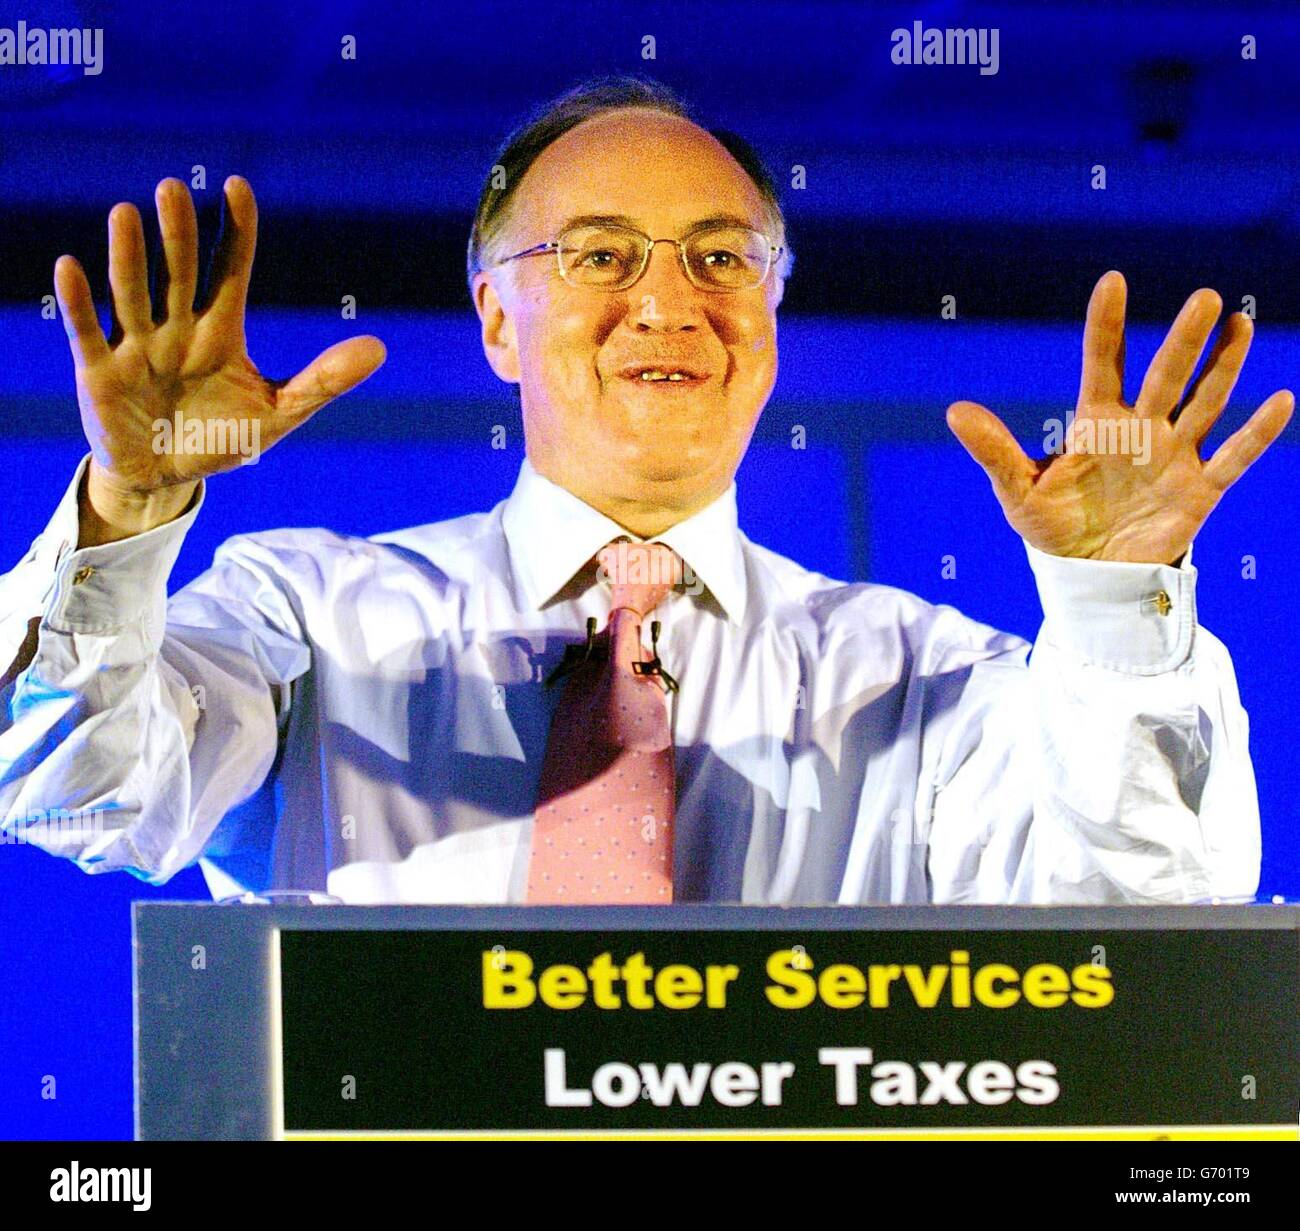 Michael Howard, leader of the Conservative Party launches his local government campaign for the forthcoming elections in June, at the National Indoor Arena (NIA) in Birmingham. Mr Howard said the Tories would free councils from Whitehall red tape and demands, and hand power back to the people. Stock Photo